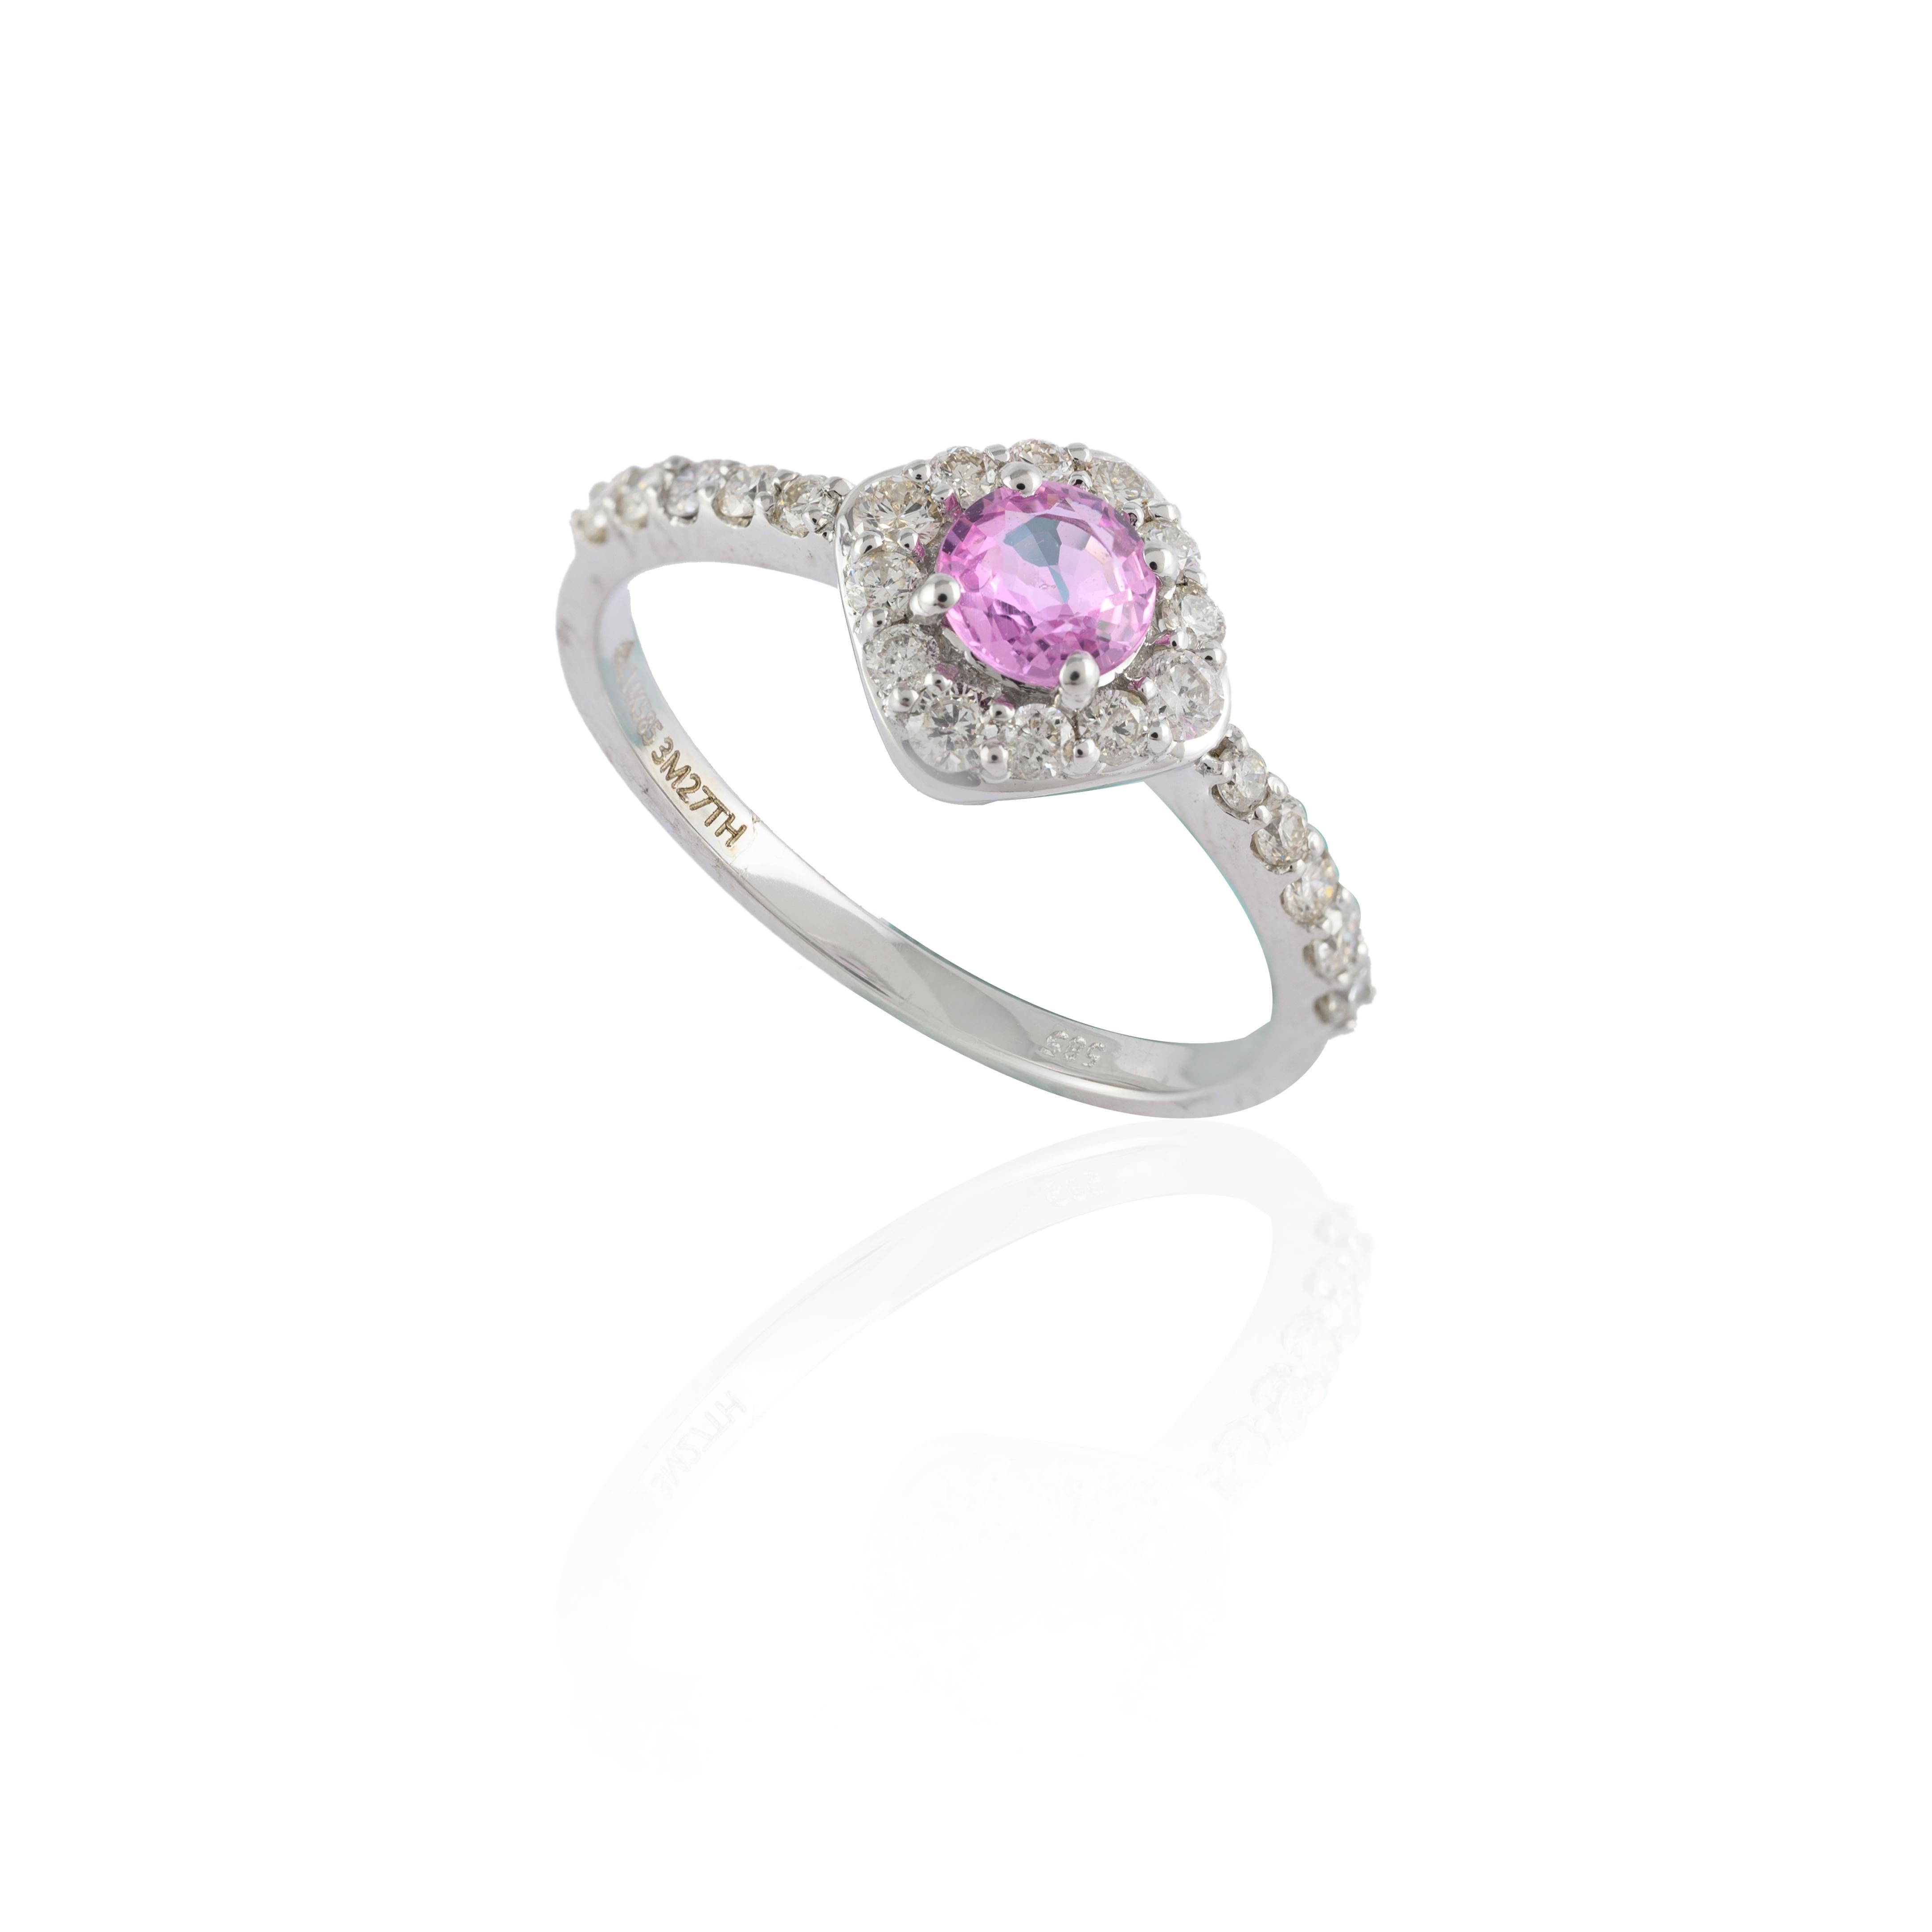 For Sale:  Minimal Halo Diamond and Pink Sapphire Ring Studded in 14k Solid White Gold 12